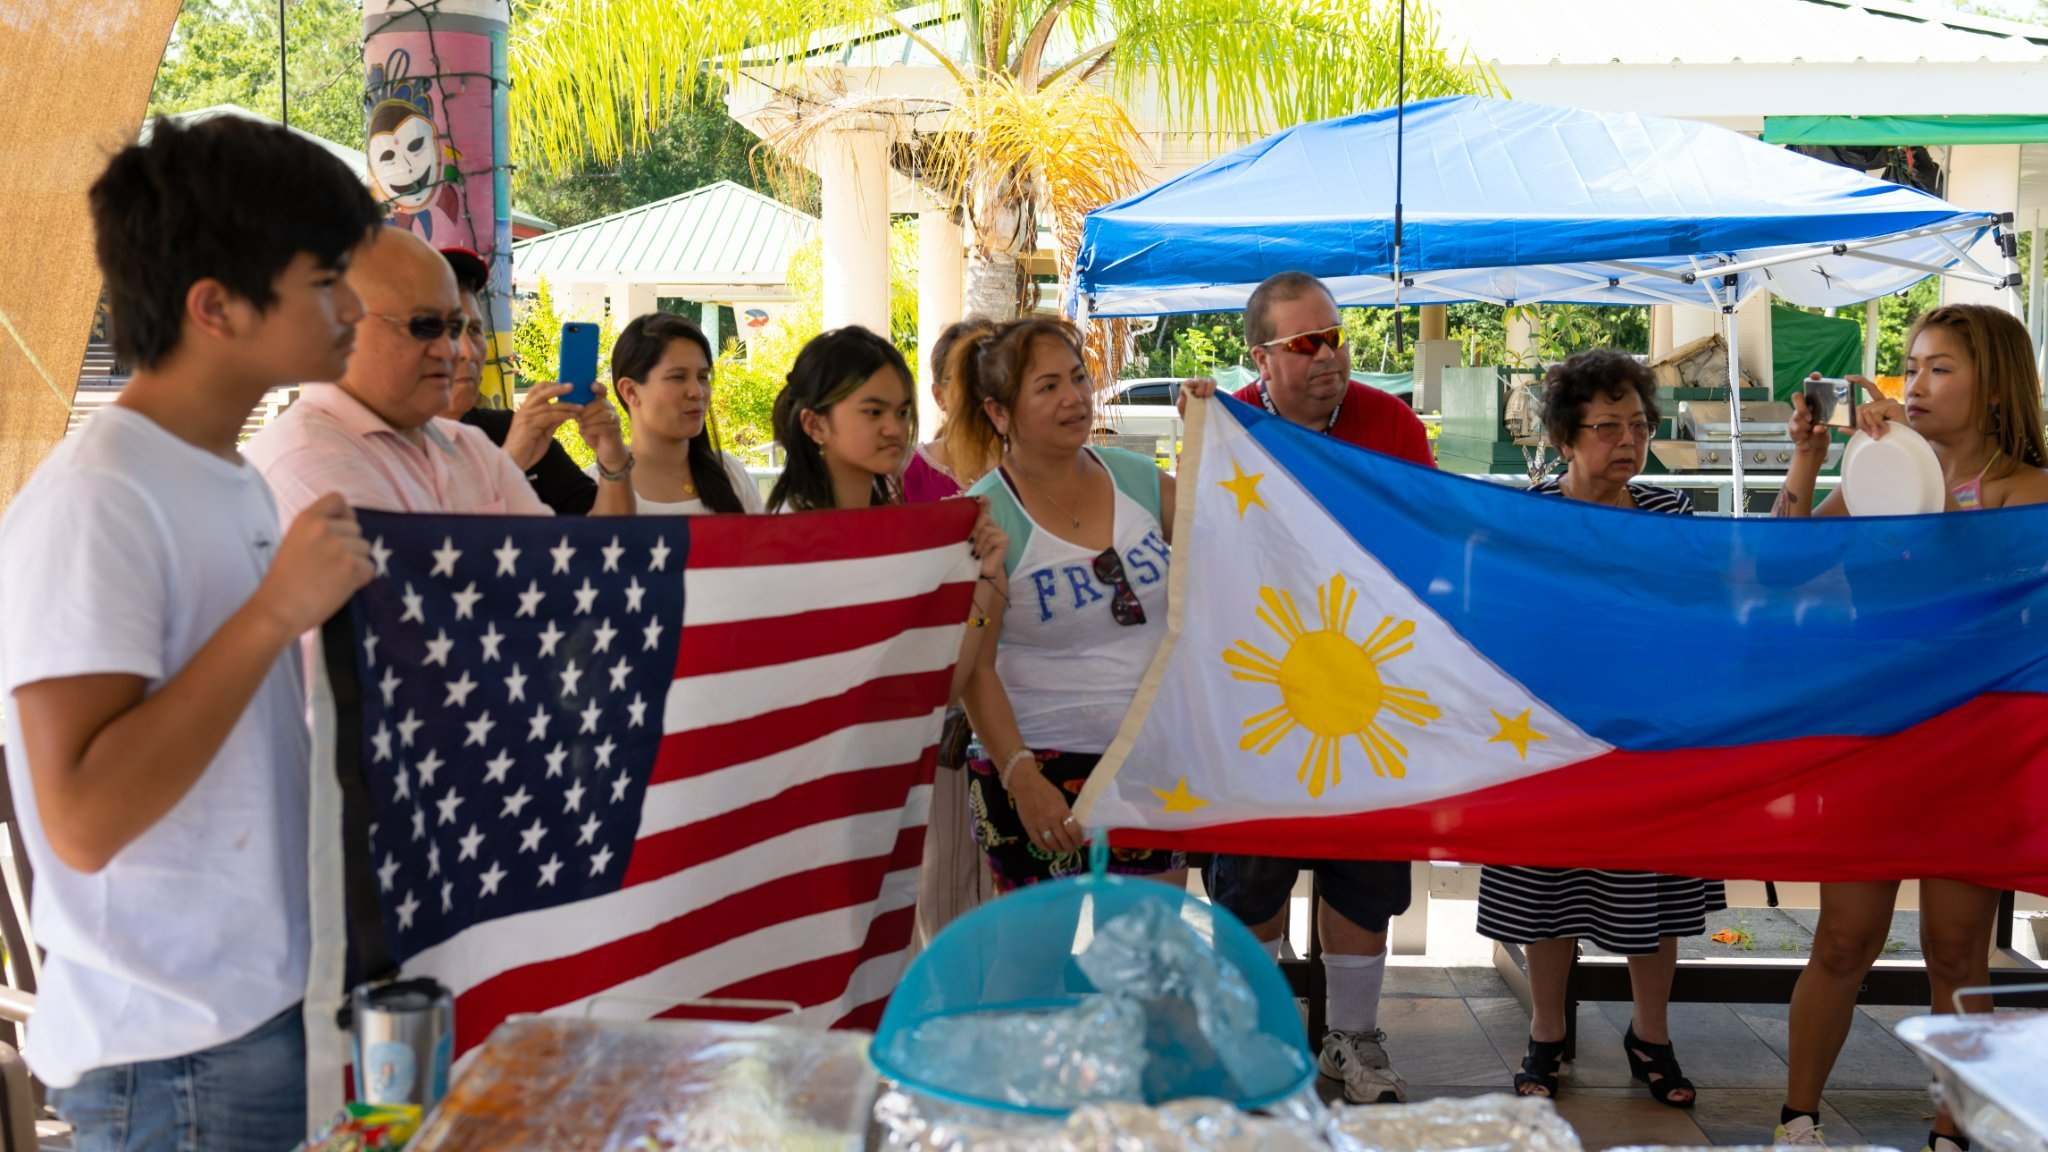 PHILIPPINE INDEPENDENCE DAY CELEBRATION IN TAMPA_01